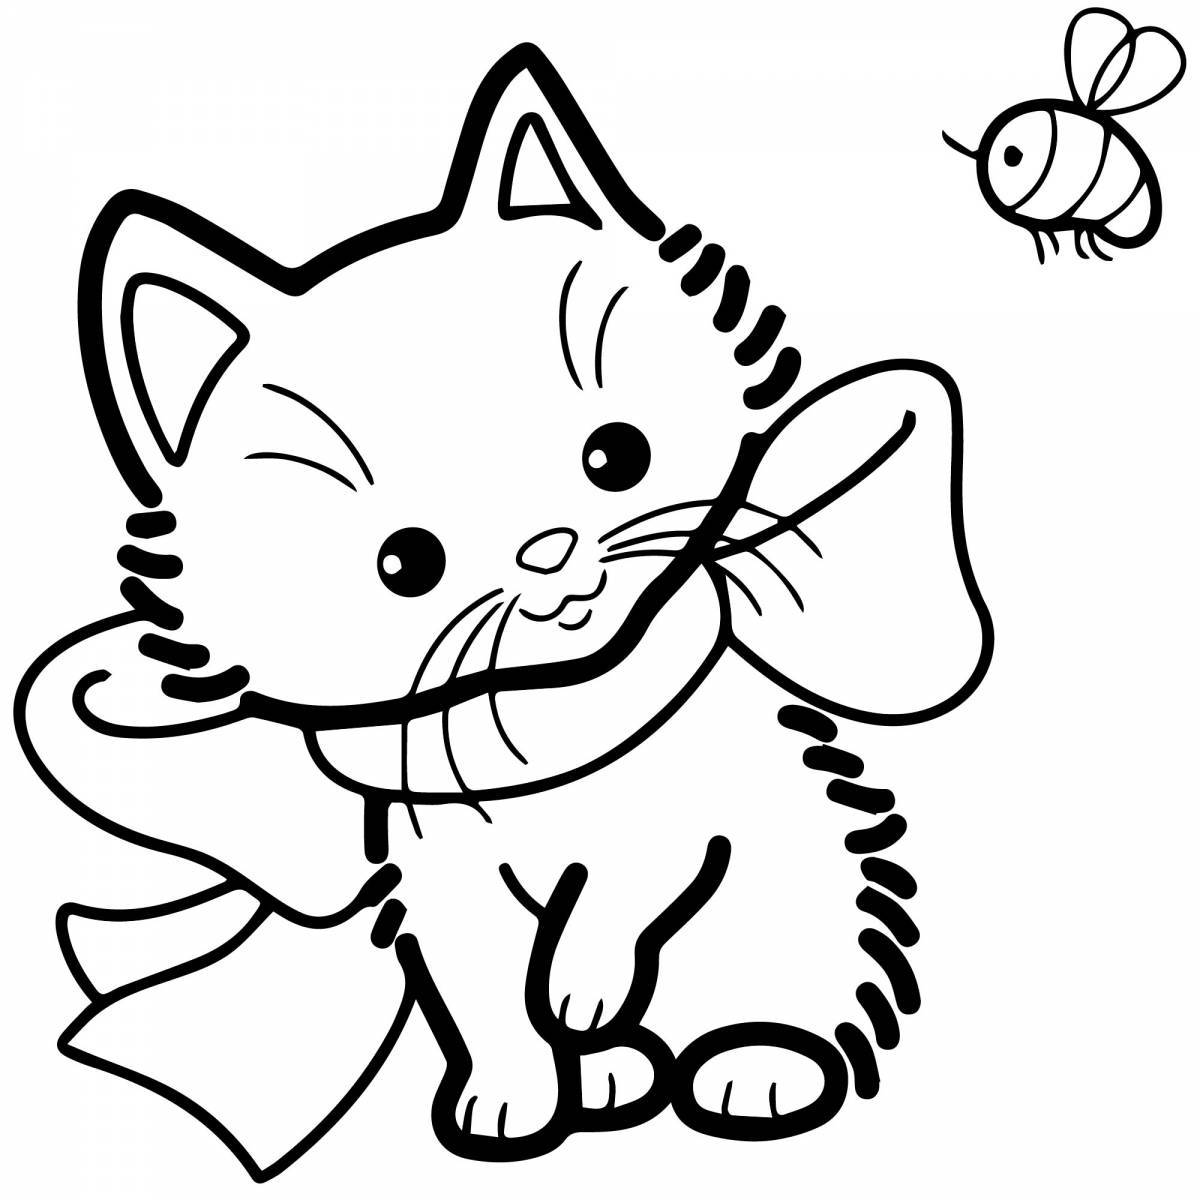 Cat coloring pages for kids